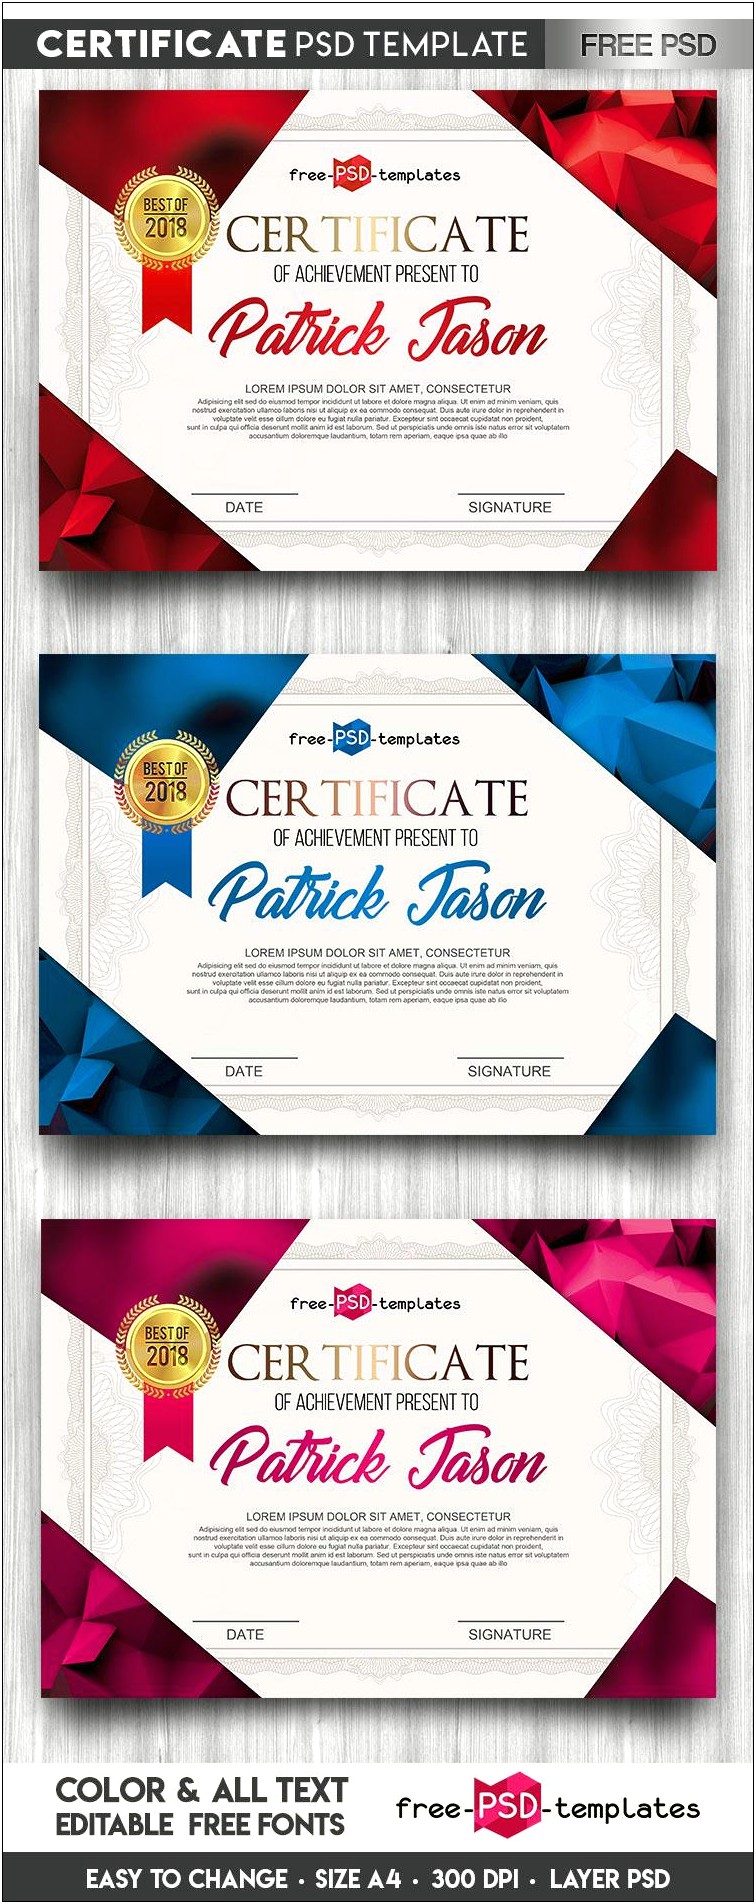 Certificate Template Psd Photoshop Free Download